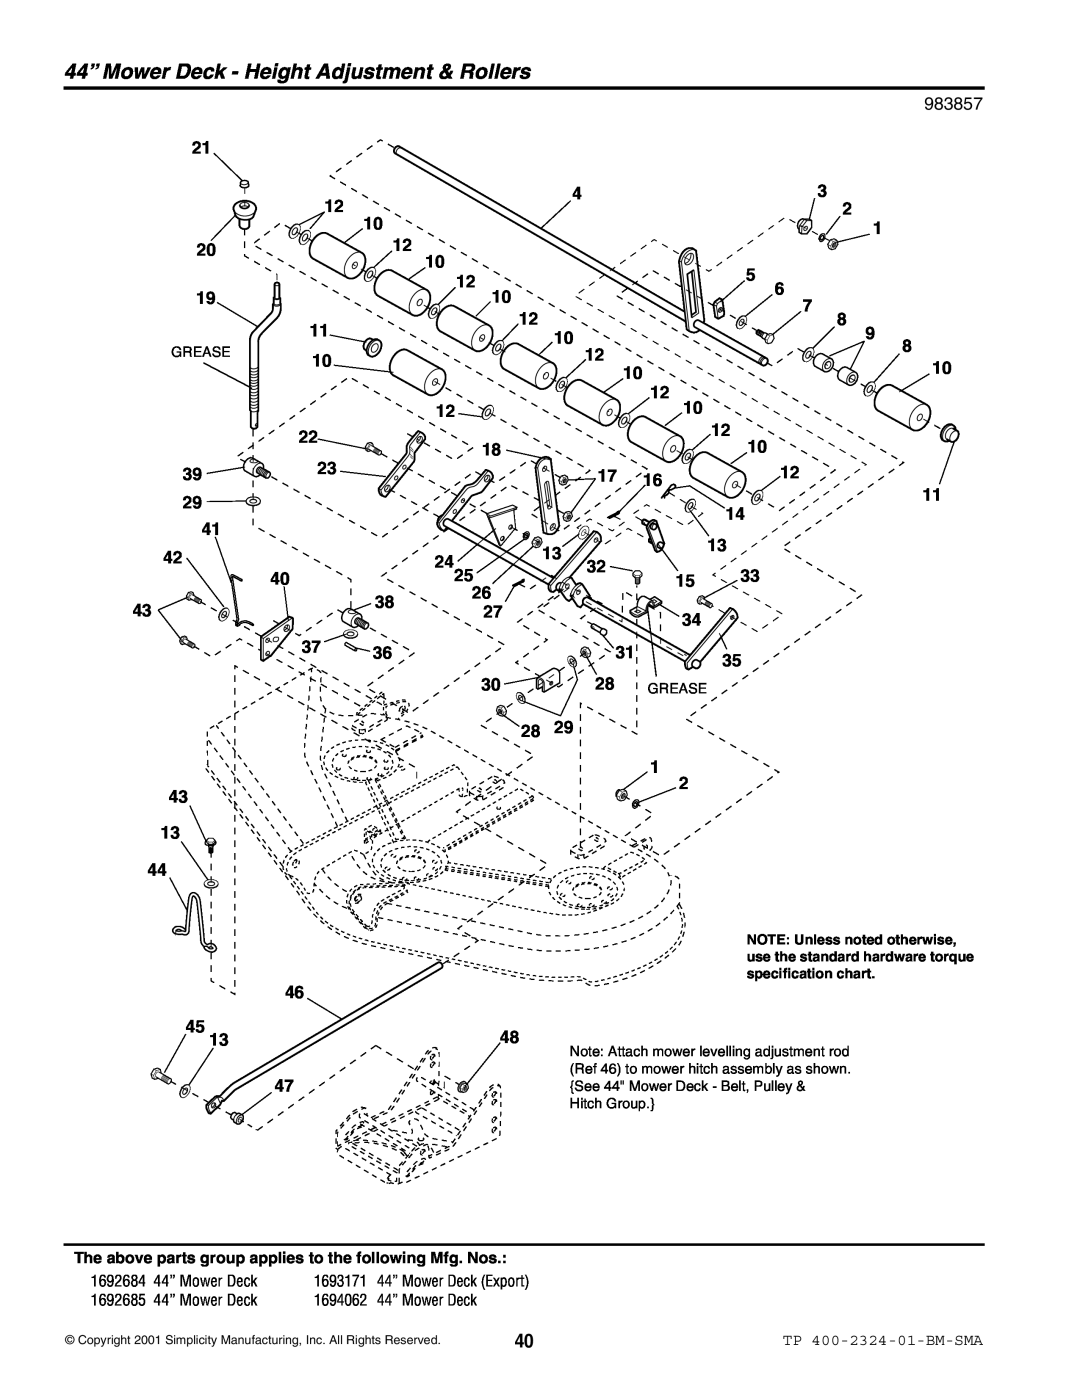 Simplicity 2600 44” Mower Deck - Height Adjustment & Rollers, The above parts group applies to the following Mfg. Nos 